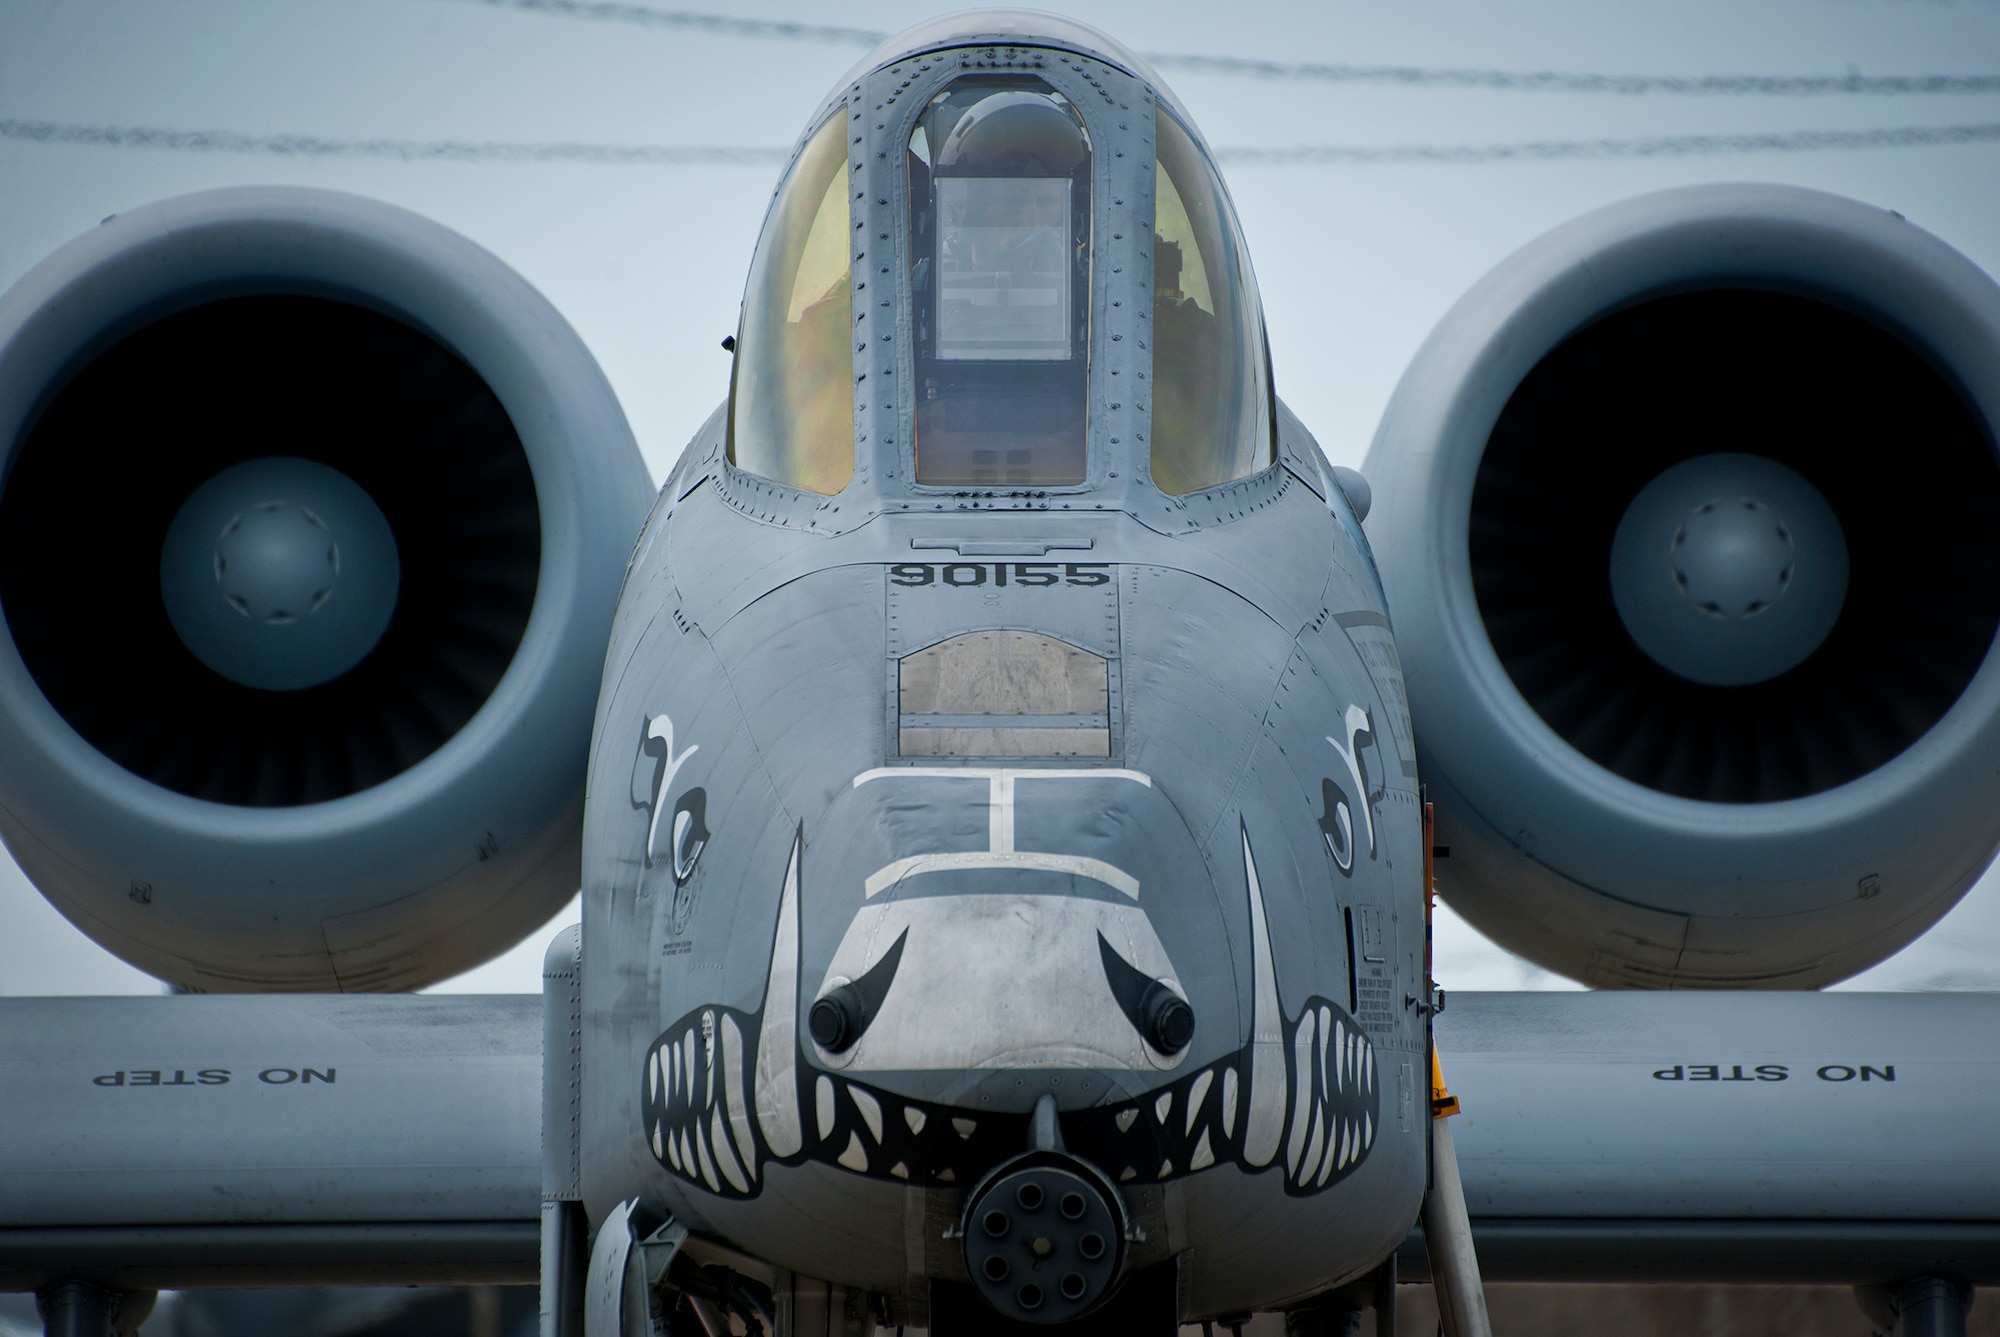 An A-10 Thunderbolt II pilot from the 442nd Fighter Wing readies his aircraft before a sortie at Eglin Air Force Base, Fla., March 20.  The 442nd A-10s traveled from Whiteman AFB for the week-long, air-to-ground weapons system evaluation program called Combat Hammer.  Combat Hammer, run by the 86th Fighter Weapons Squadron, is used to evaluate the effectiveness and suitability of combat air force weapon systems. The air-to-air and air-to-ground WSEP evaluations are accomplished during tactical deliveries of fighter, bomber and unmanned aircraft system precision guided munitions, on realistic targets with air-to-air and surface-to-air defenses. (U.S. Air Force photo/Samuel King Jr.)